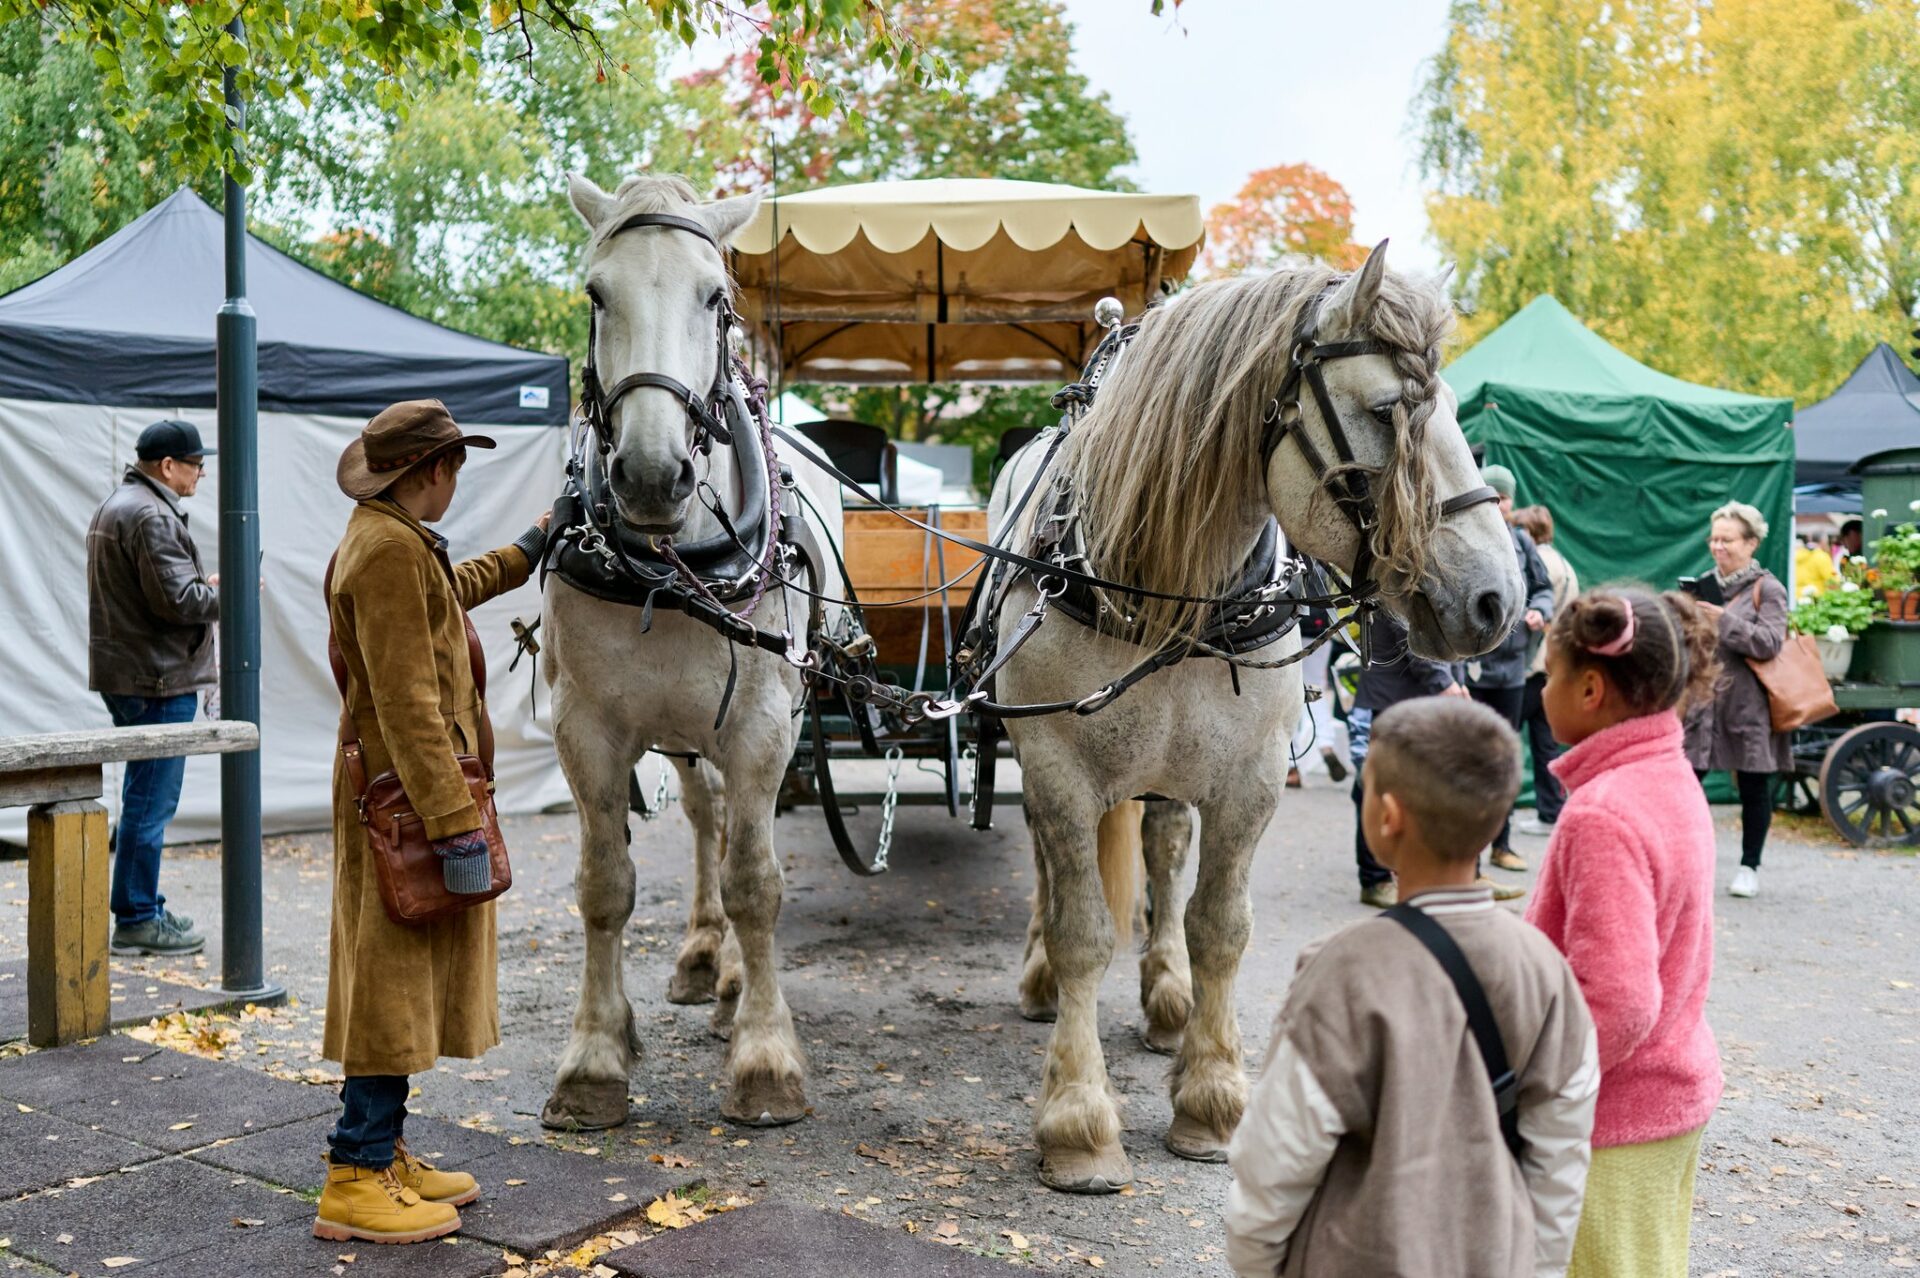 The two-day Big Craft Event in the Tallipiha included pony rides, horse-drawn carriage rides and live music.